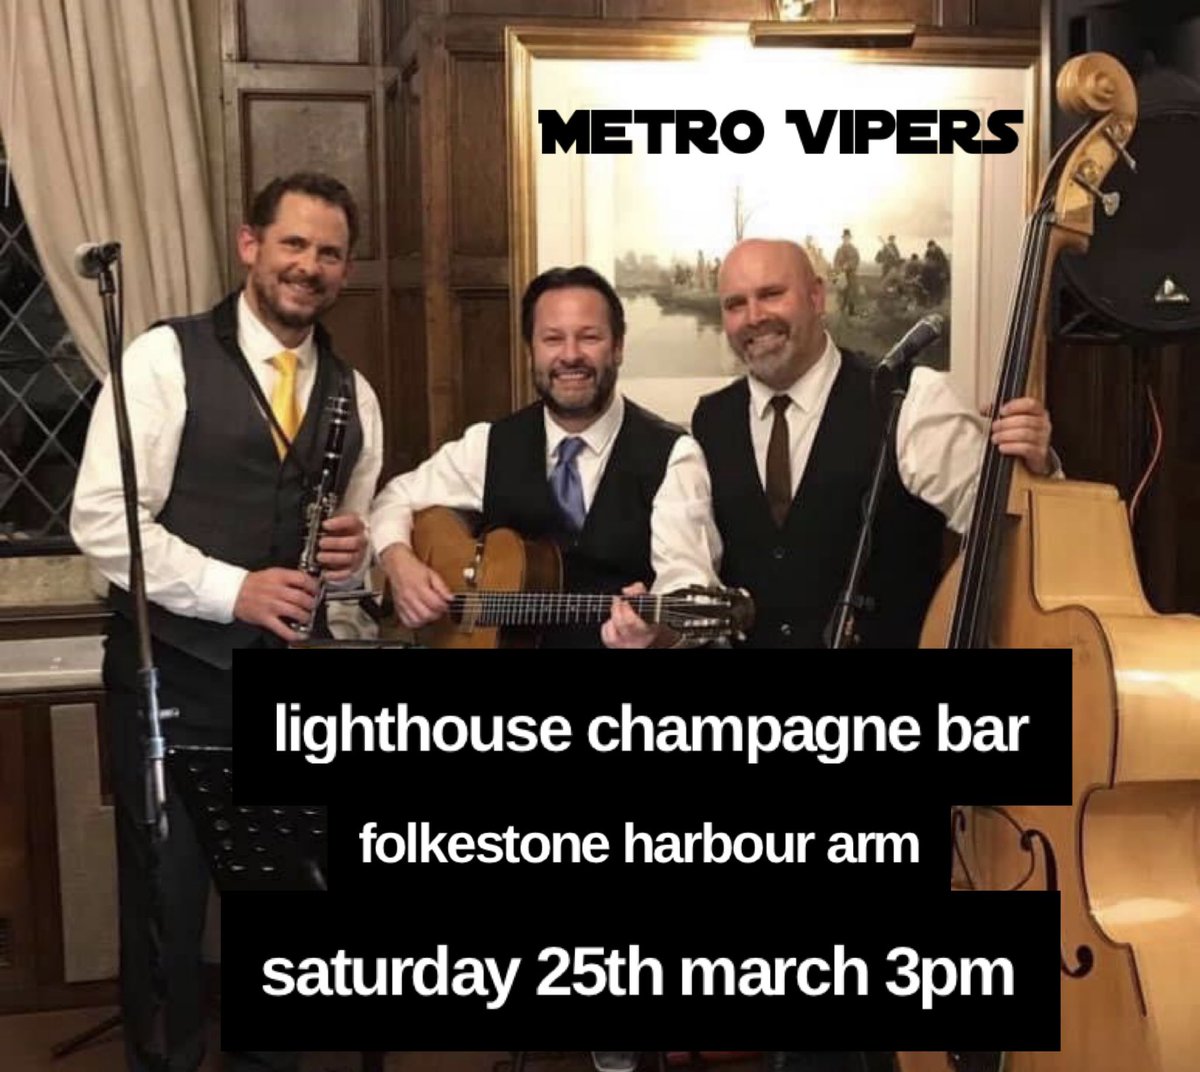 This Saturday 25th March from 3pm you can catch us at the Lighthouse Champagne Bar on @FstoneHbourArm in…Folkestone! Come on down for swing jazz & champagne #folkestonekent #metrovipers #swingjazz #kent #gypsyjazz #rocknroll #acousticguitar #doublebass #saxophone #clarinet